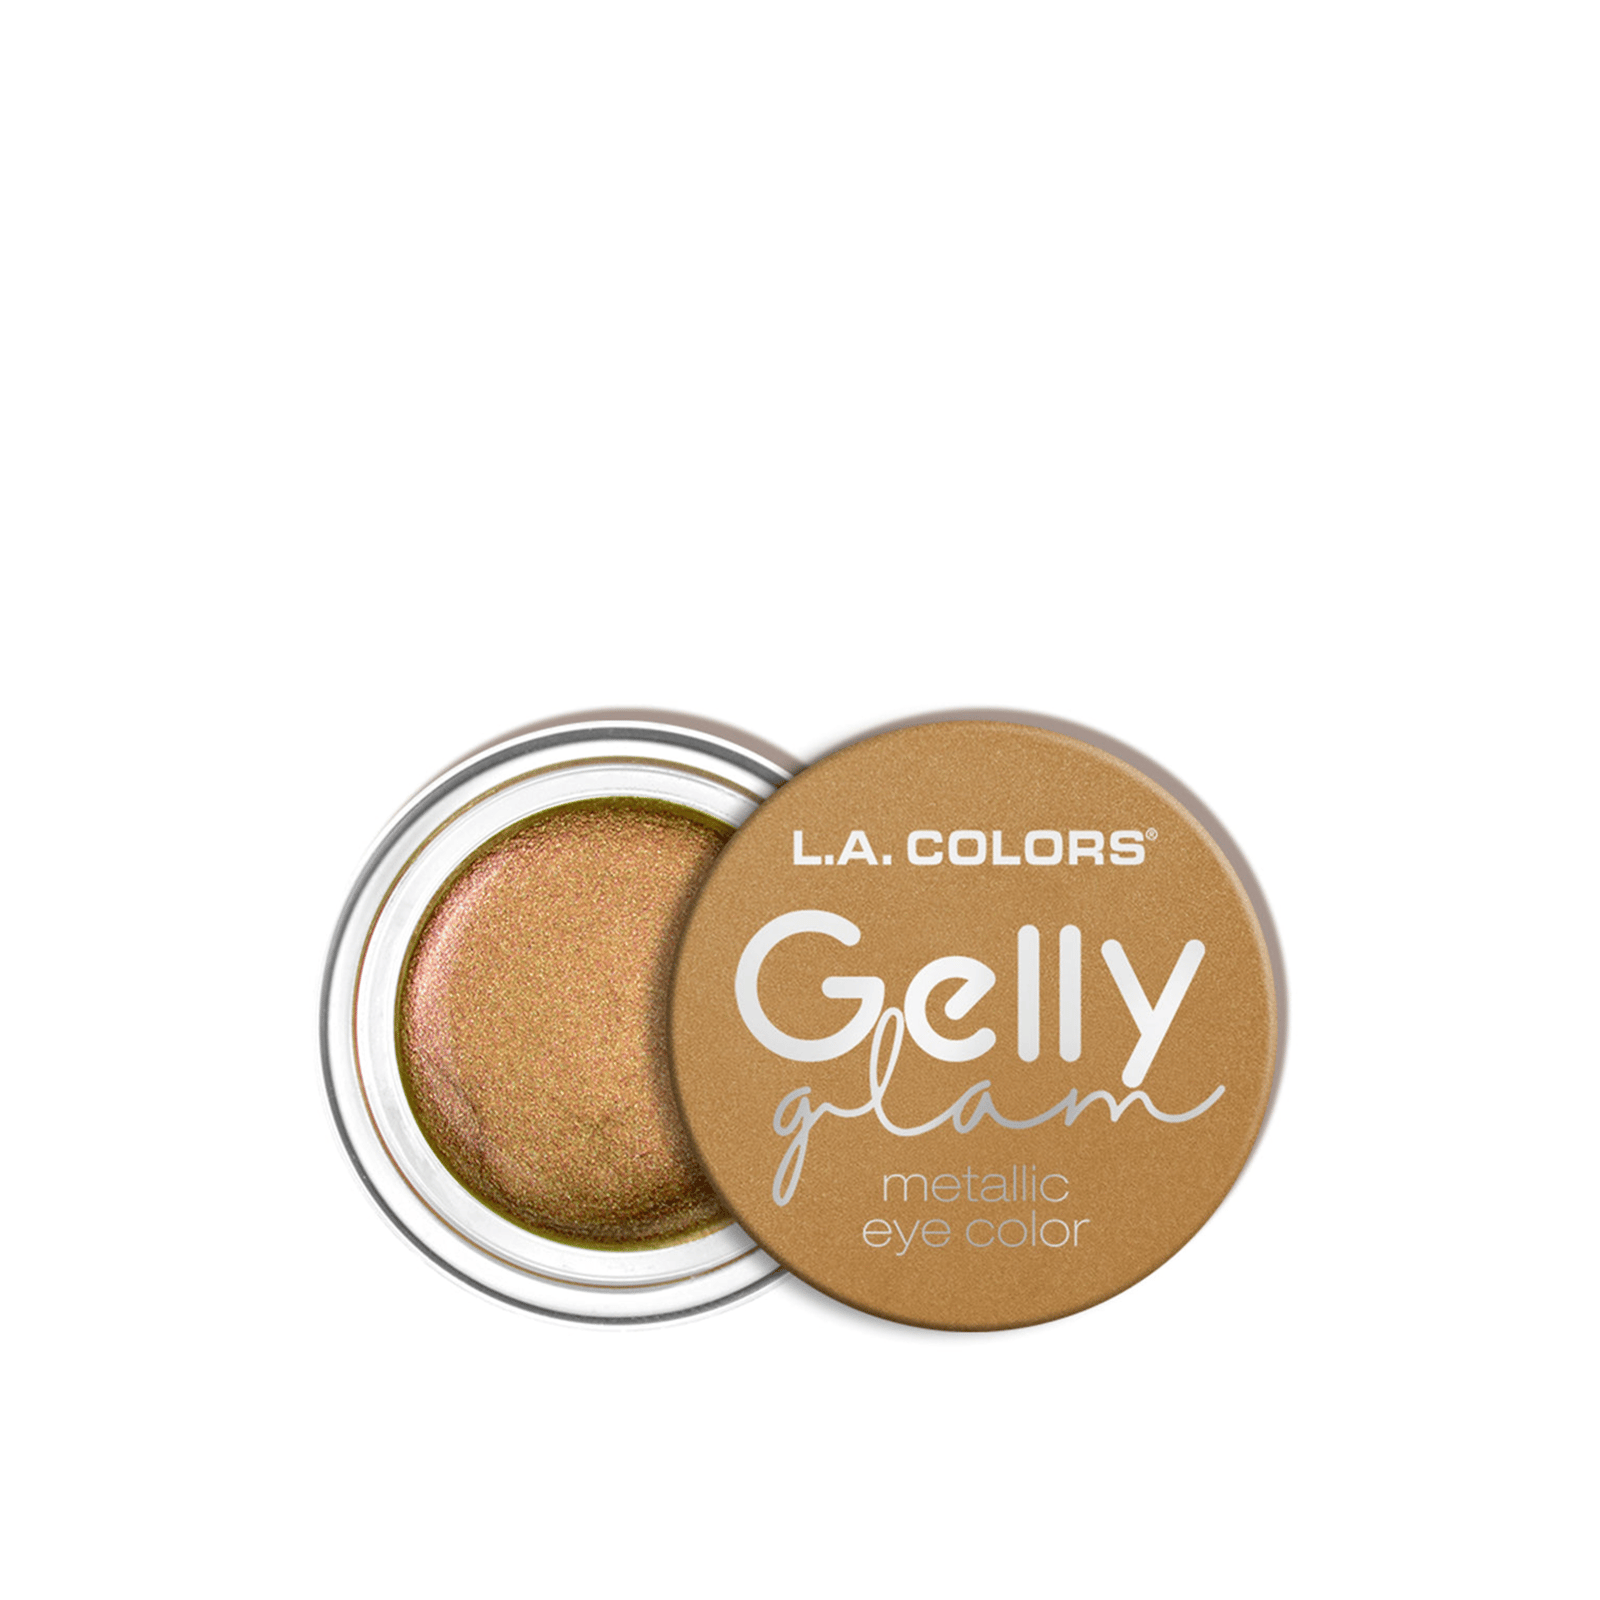 L.A Colors Gelly Glam Metallic Eye Color CES281 Queen Bee 5ml